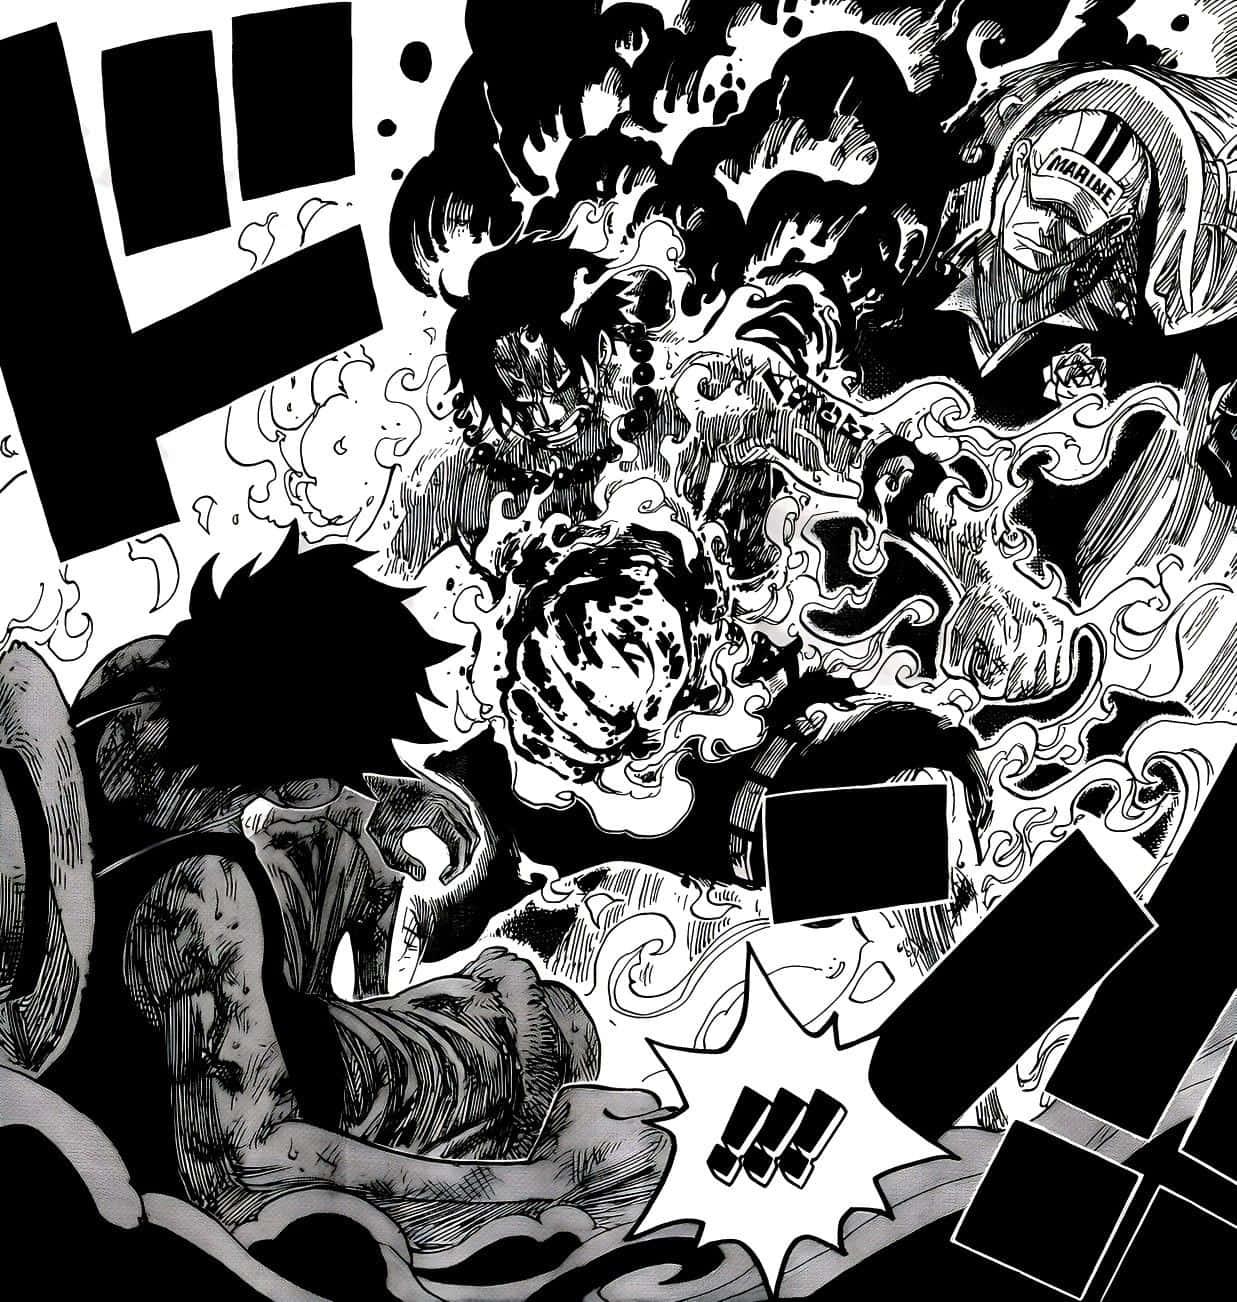 The dramatic moment of Ace's Death in One Piece Wallpaper